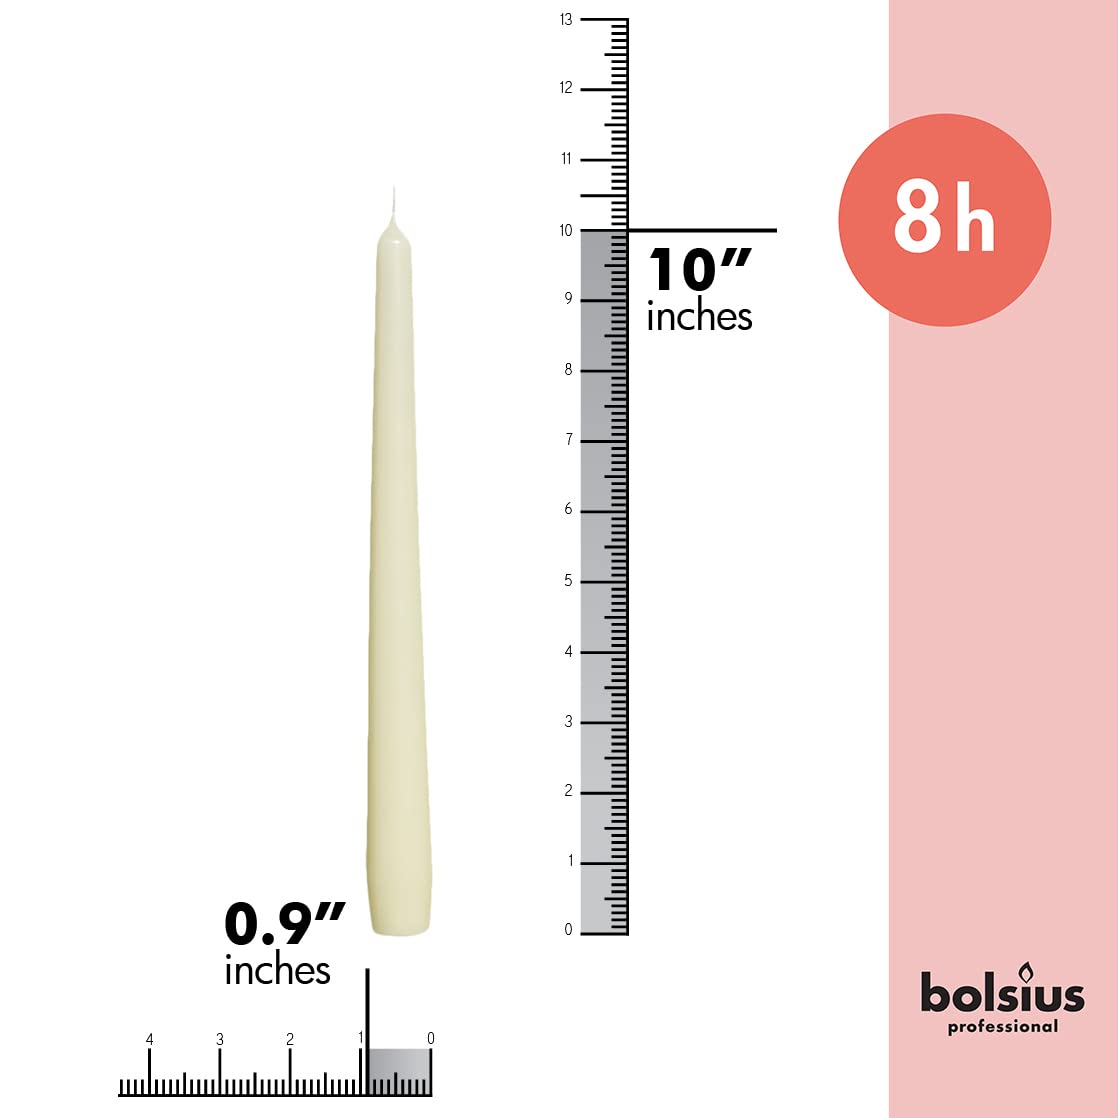 BOLSIUS Ivory Taper Candles - 12 Pack Individually Wrapped Unscented 10 Inch Dinner Candle Set - 8 Burn Hours - Premium European Quality - Smokeless & Dripless Household Wedding & Party Candlesticks  - Very Good